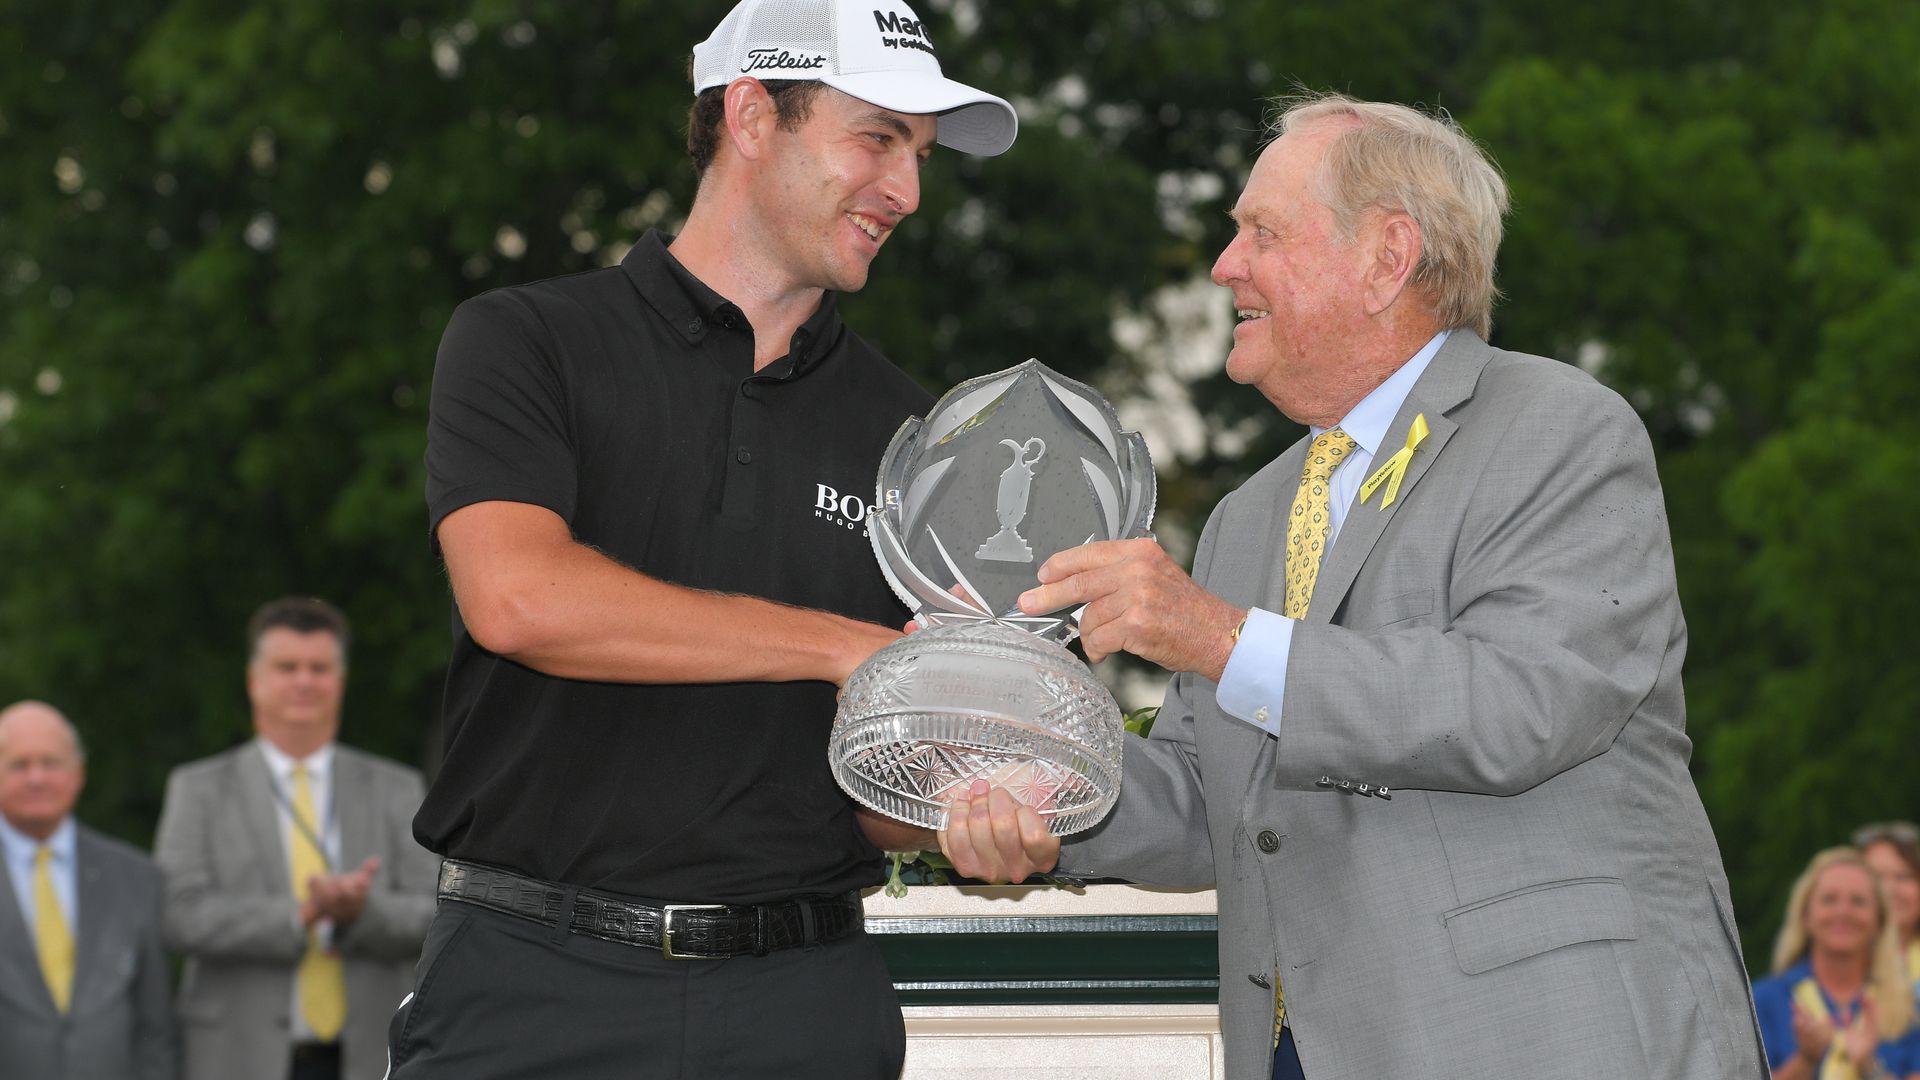 Jack Nicklaus handing a Memorial Tournament trophy to 2021 winner Patrick Cantlay.